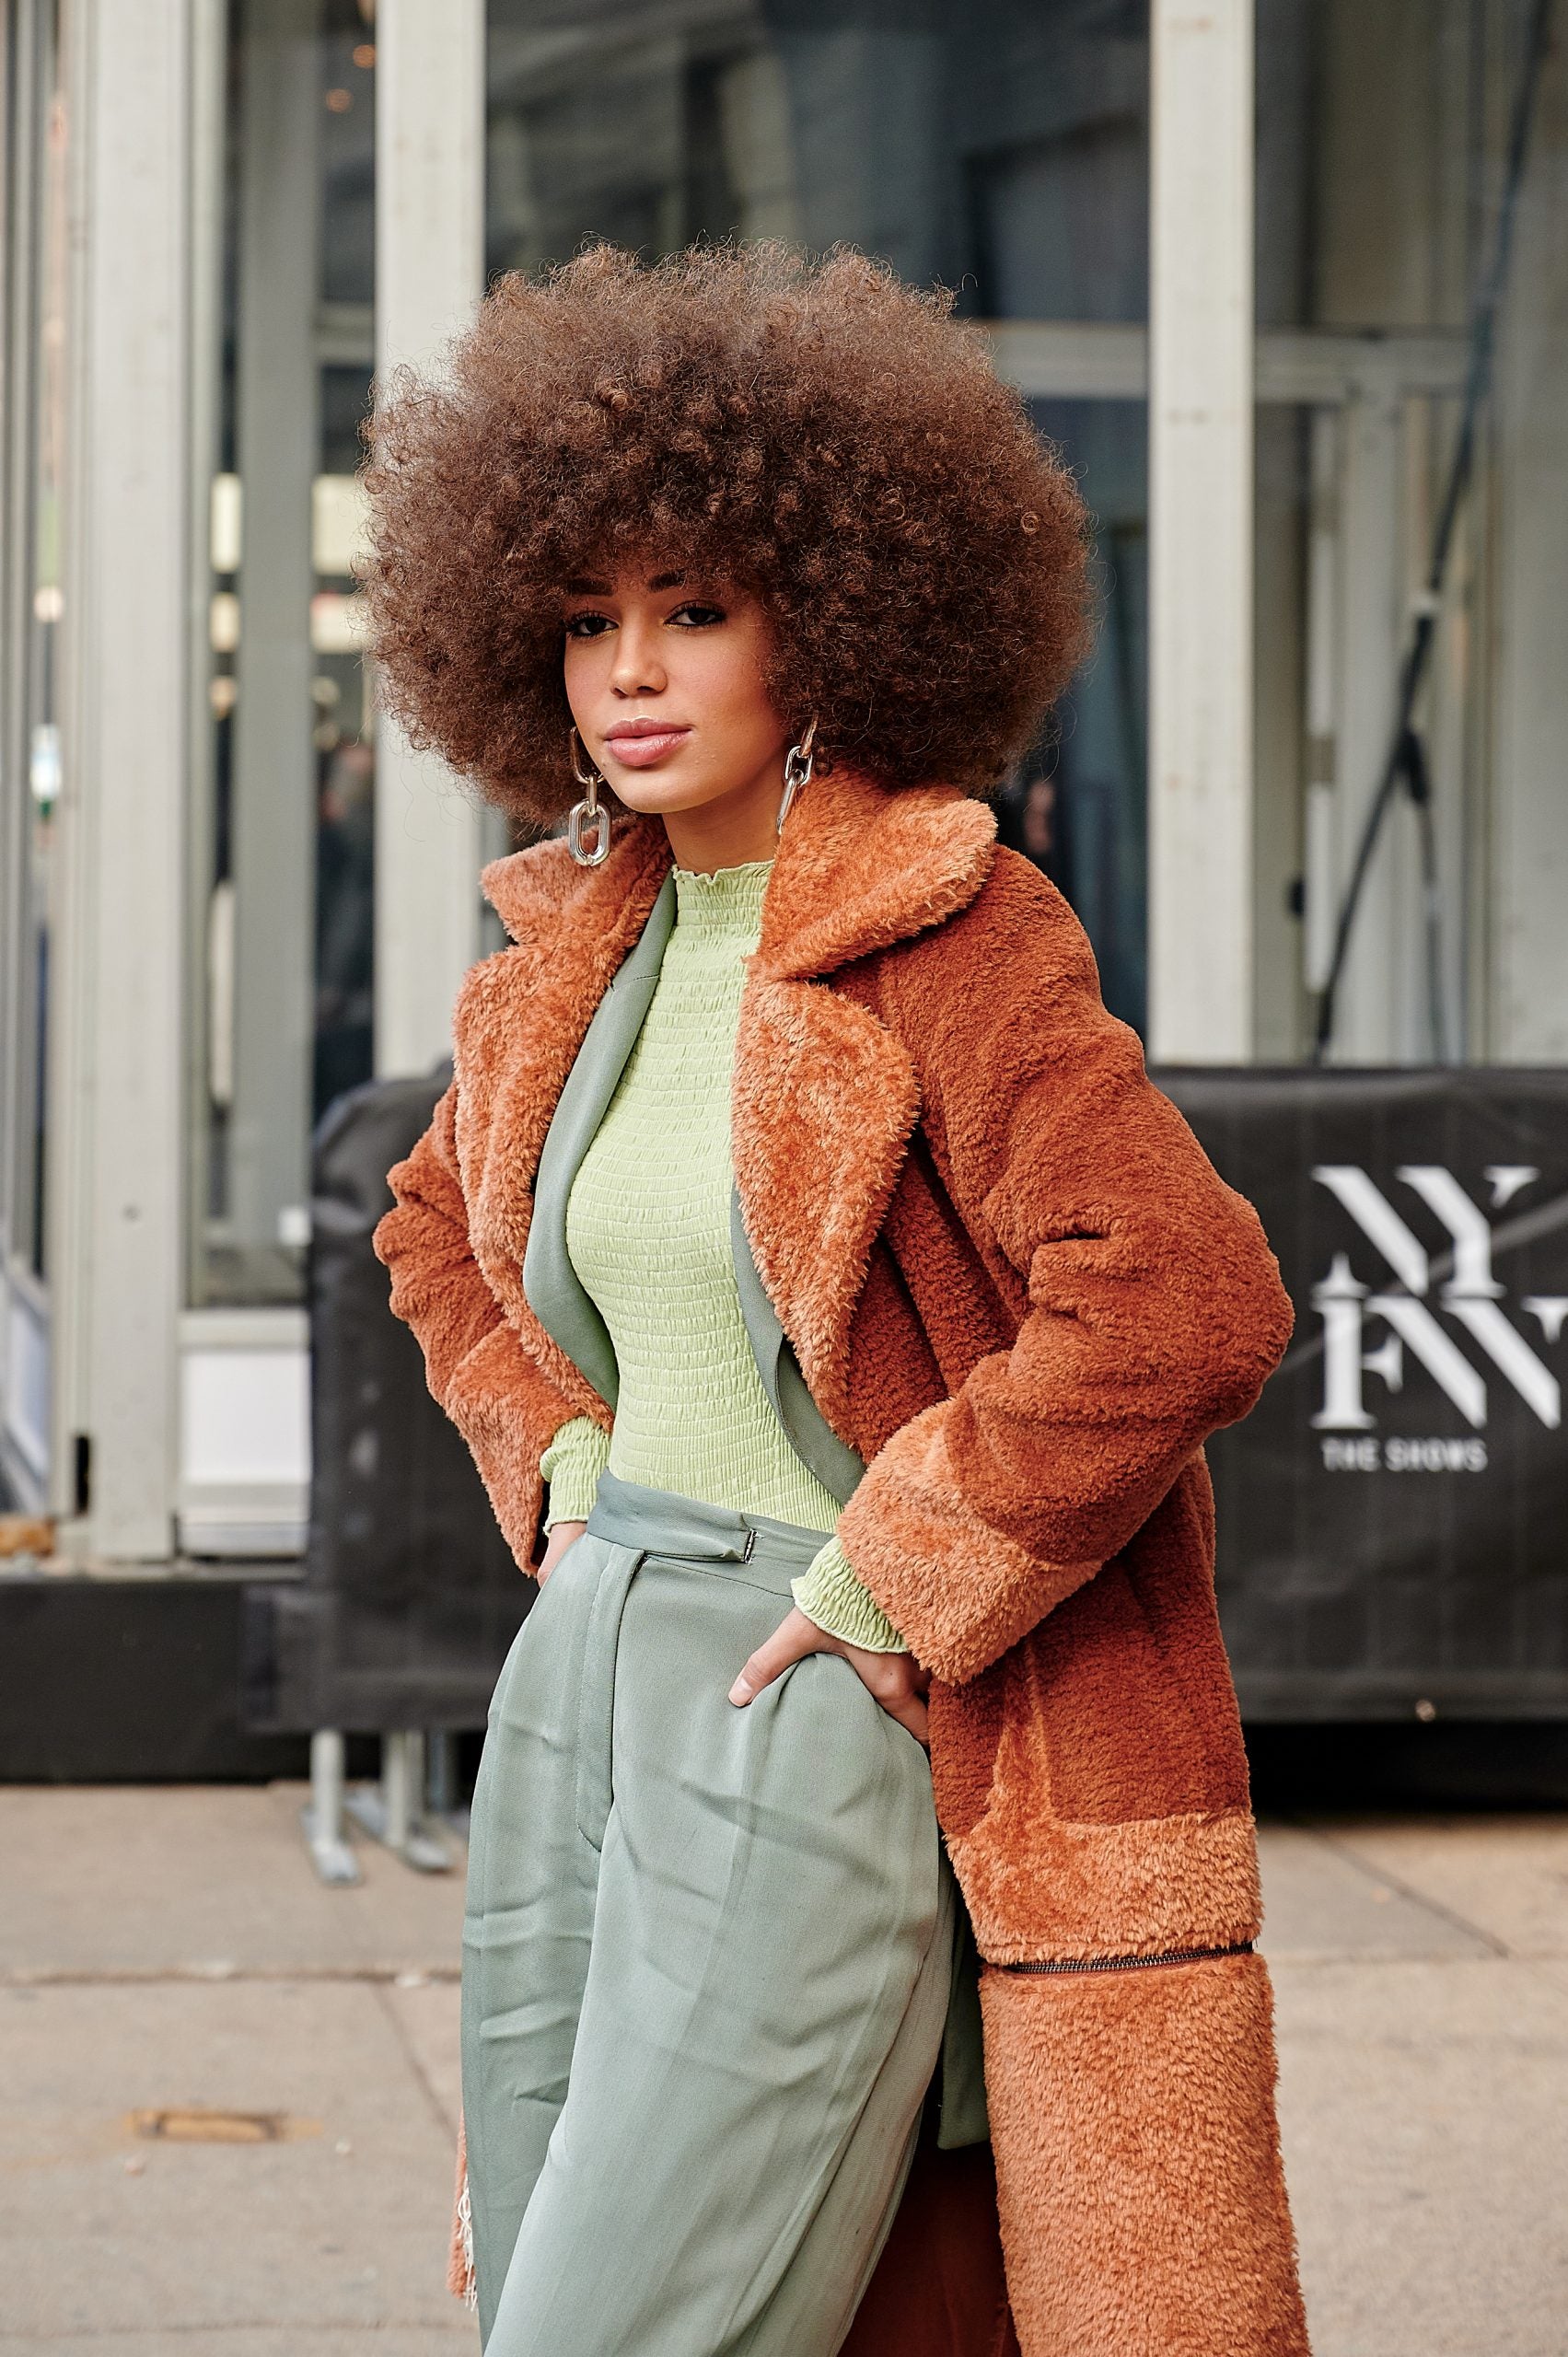 NYFW: The Best Street Style From Fall/Winter 2020